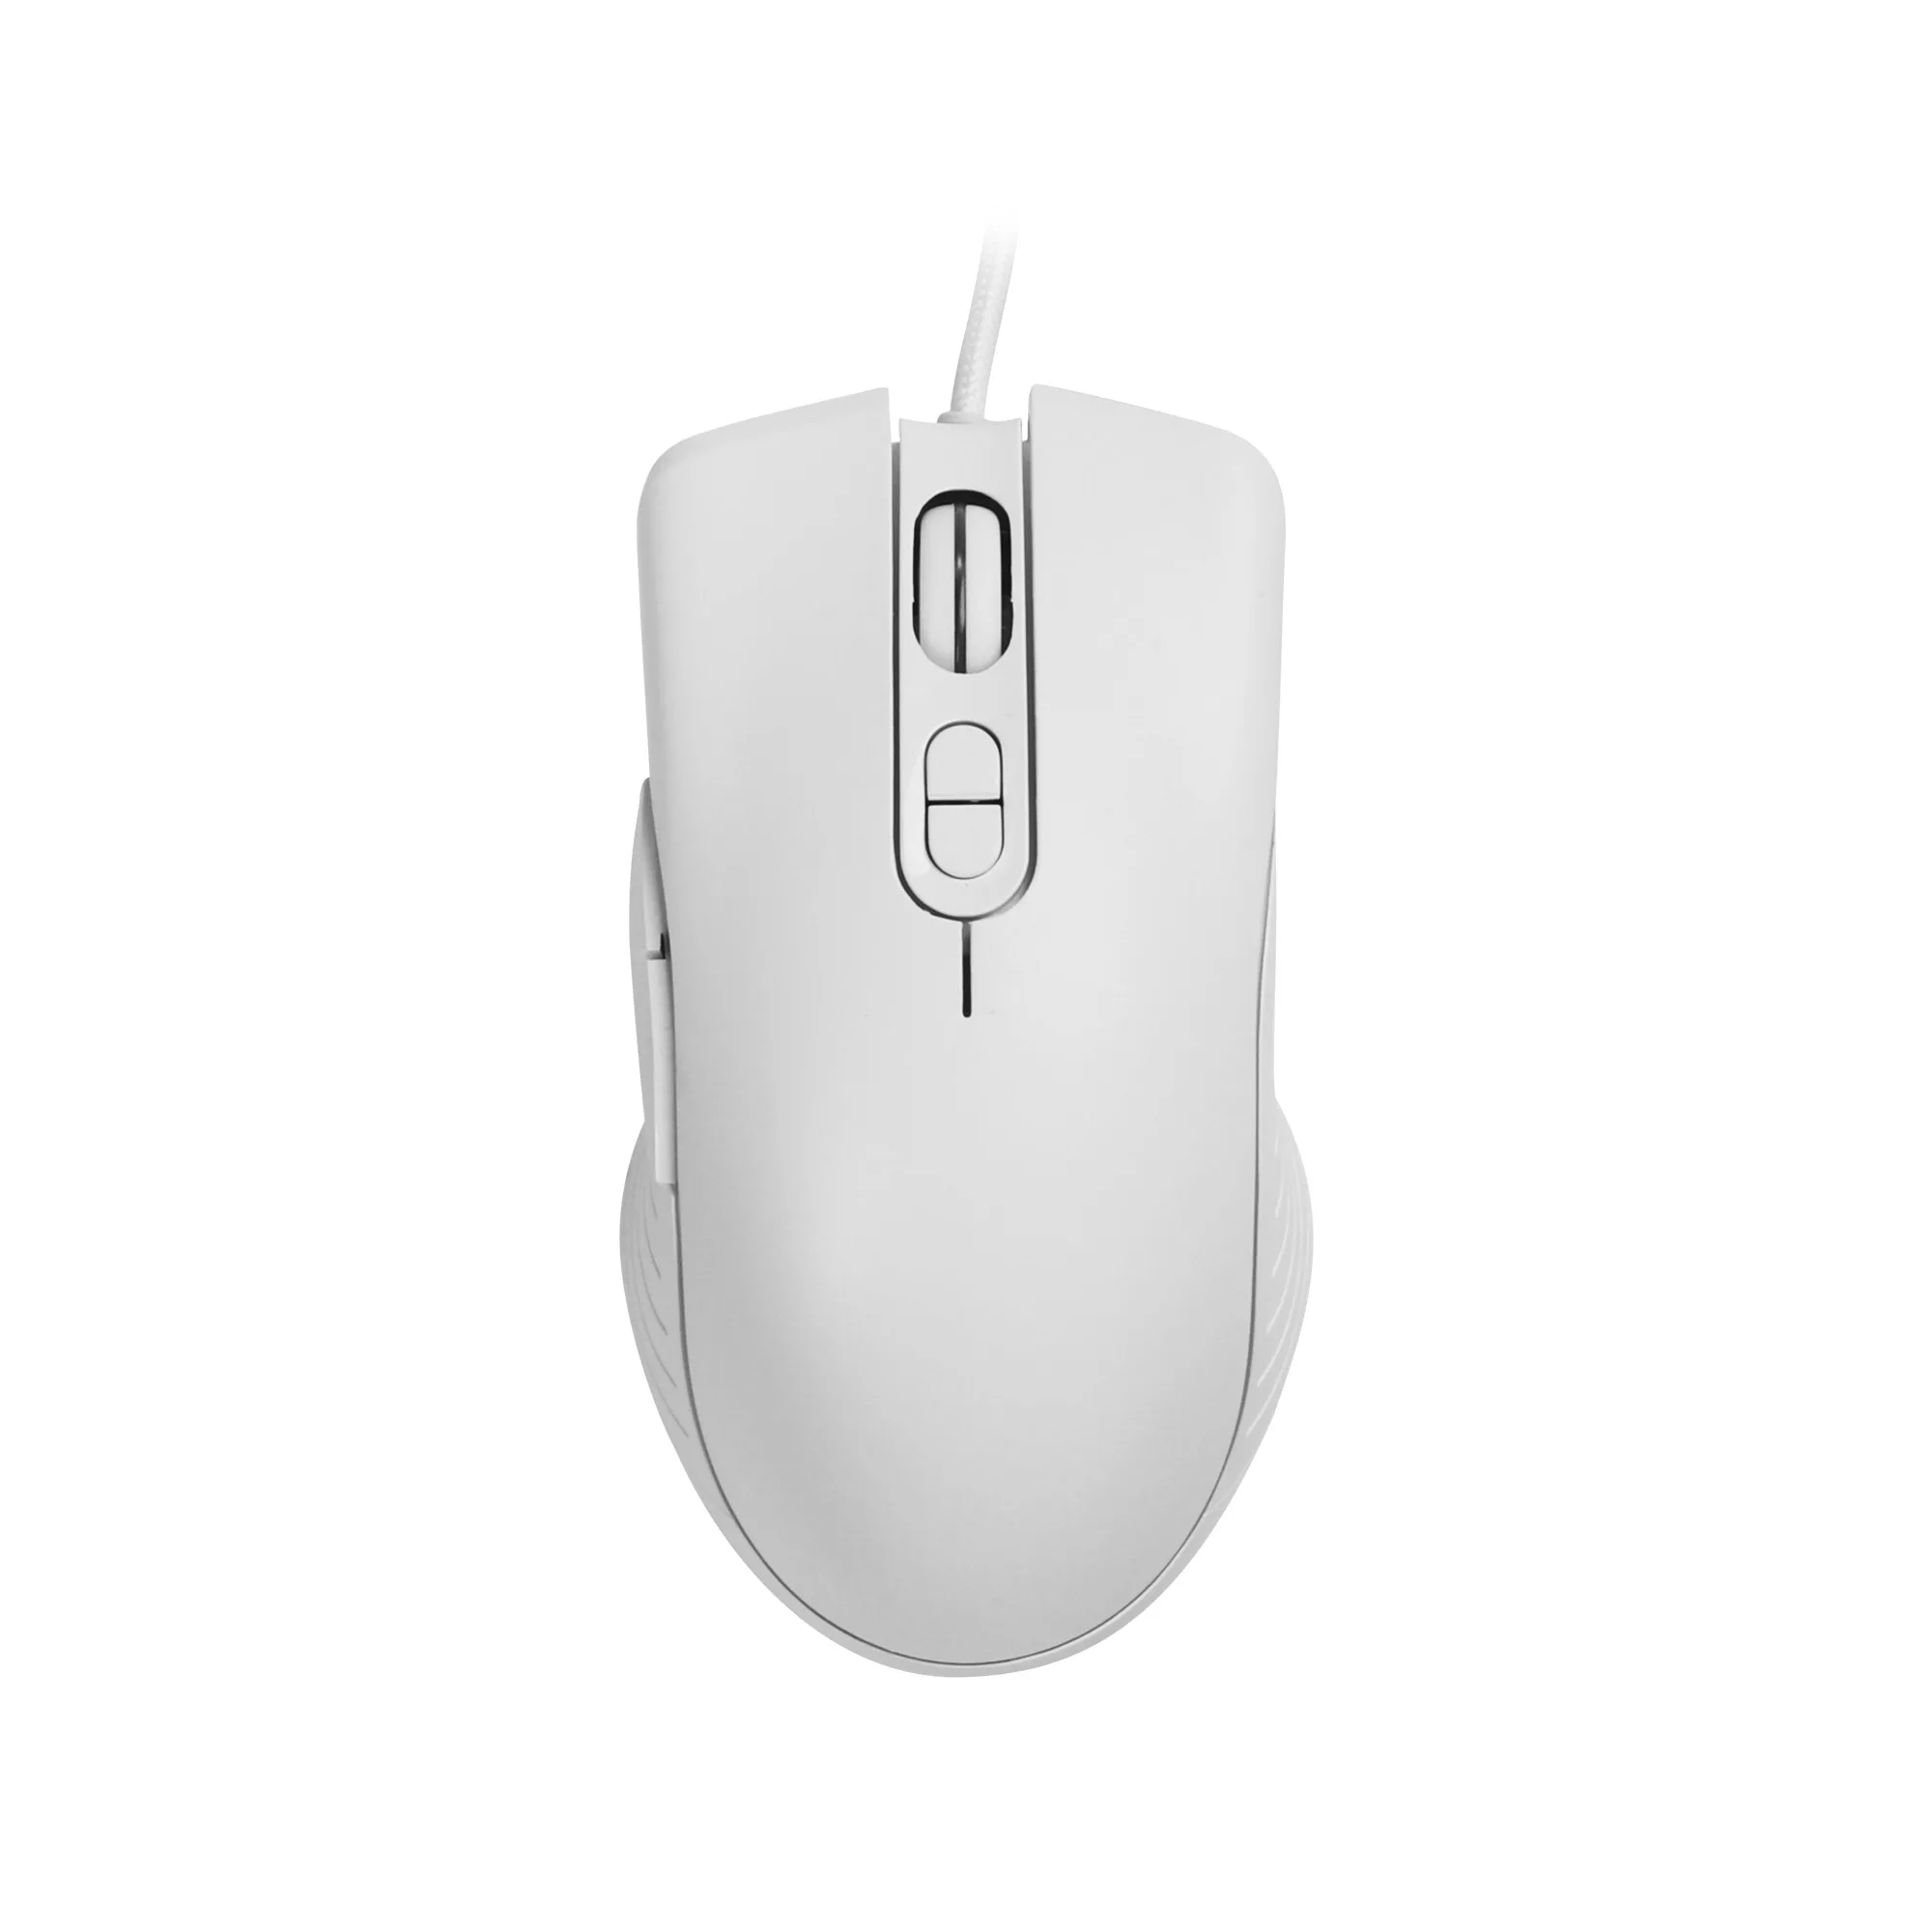 

USB Wired Mouse 1000 DPI Gaming Mouse Ergonomic RGB Backlit Mice Gamer Mause For Laptop And PC Computer Office